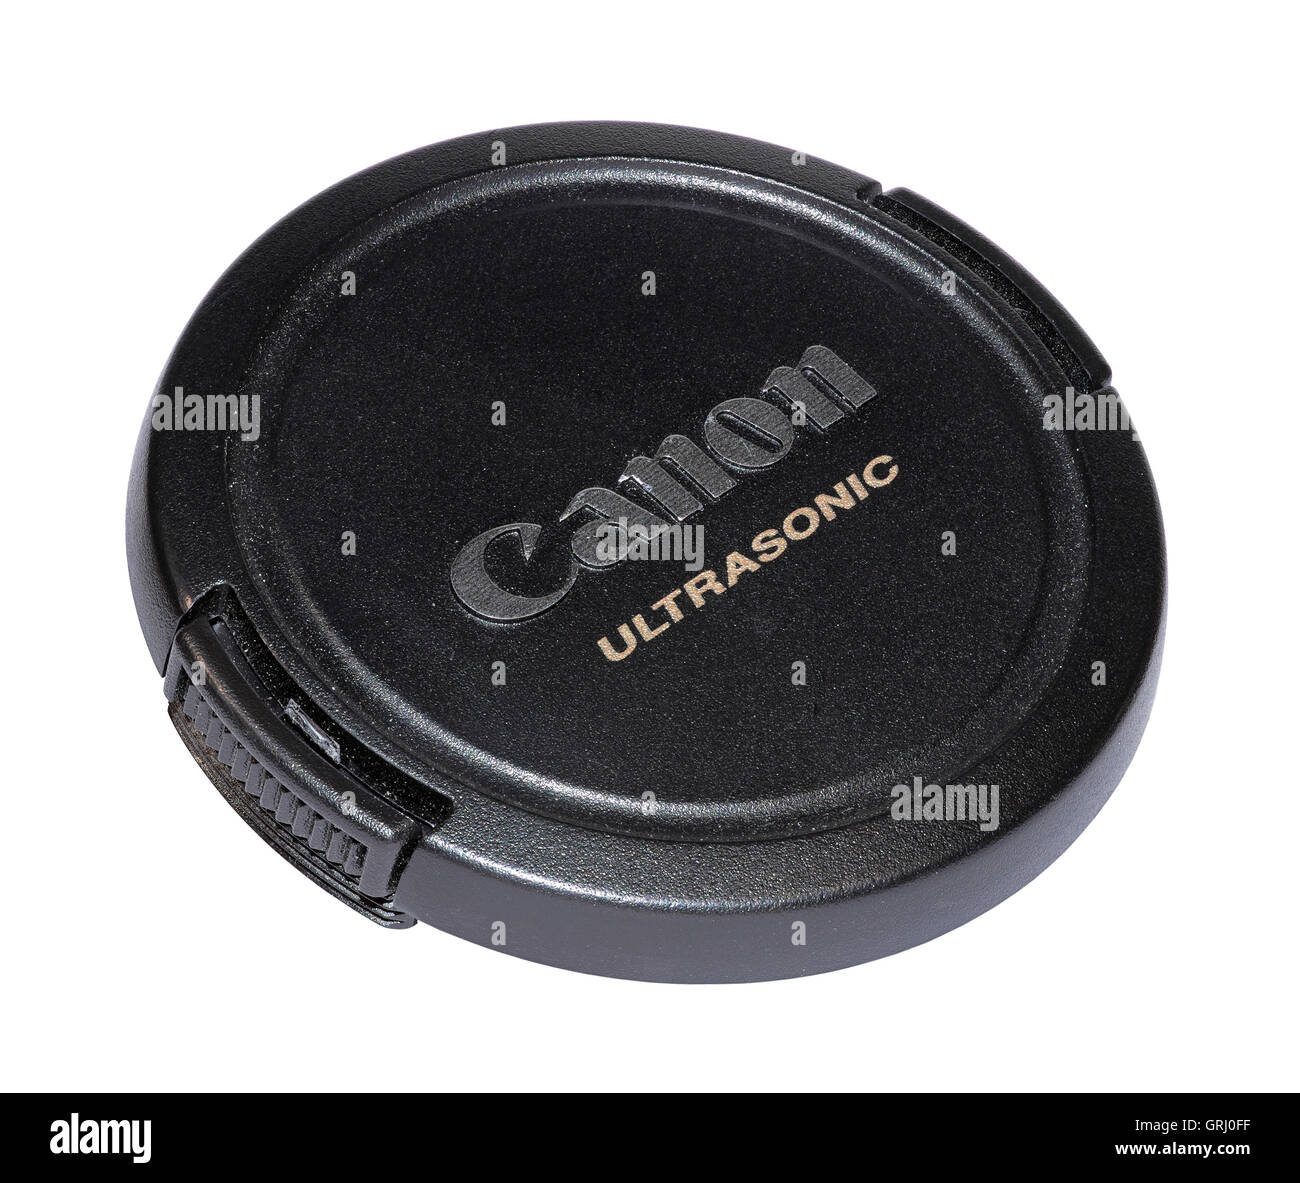 A Canon Ultrasonic lens cap isolated on a white background Stock Photo